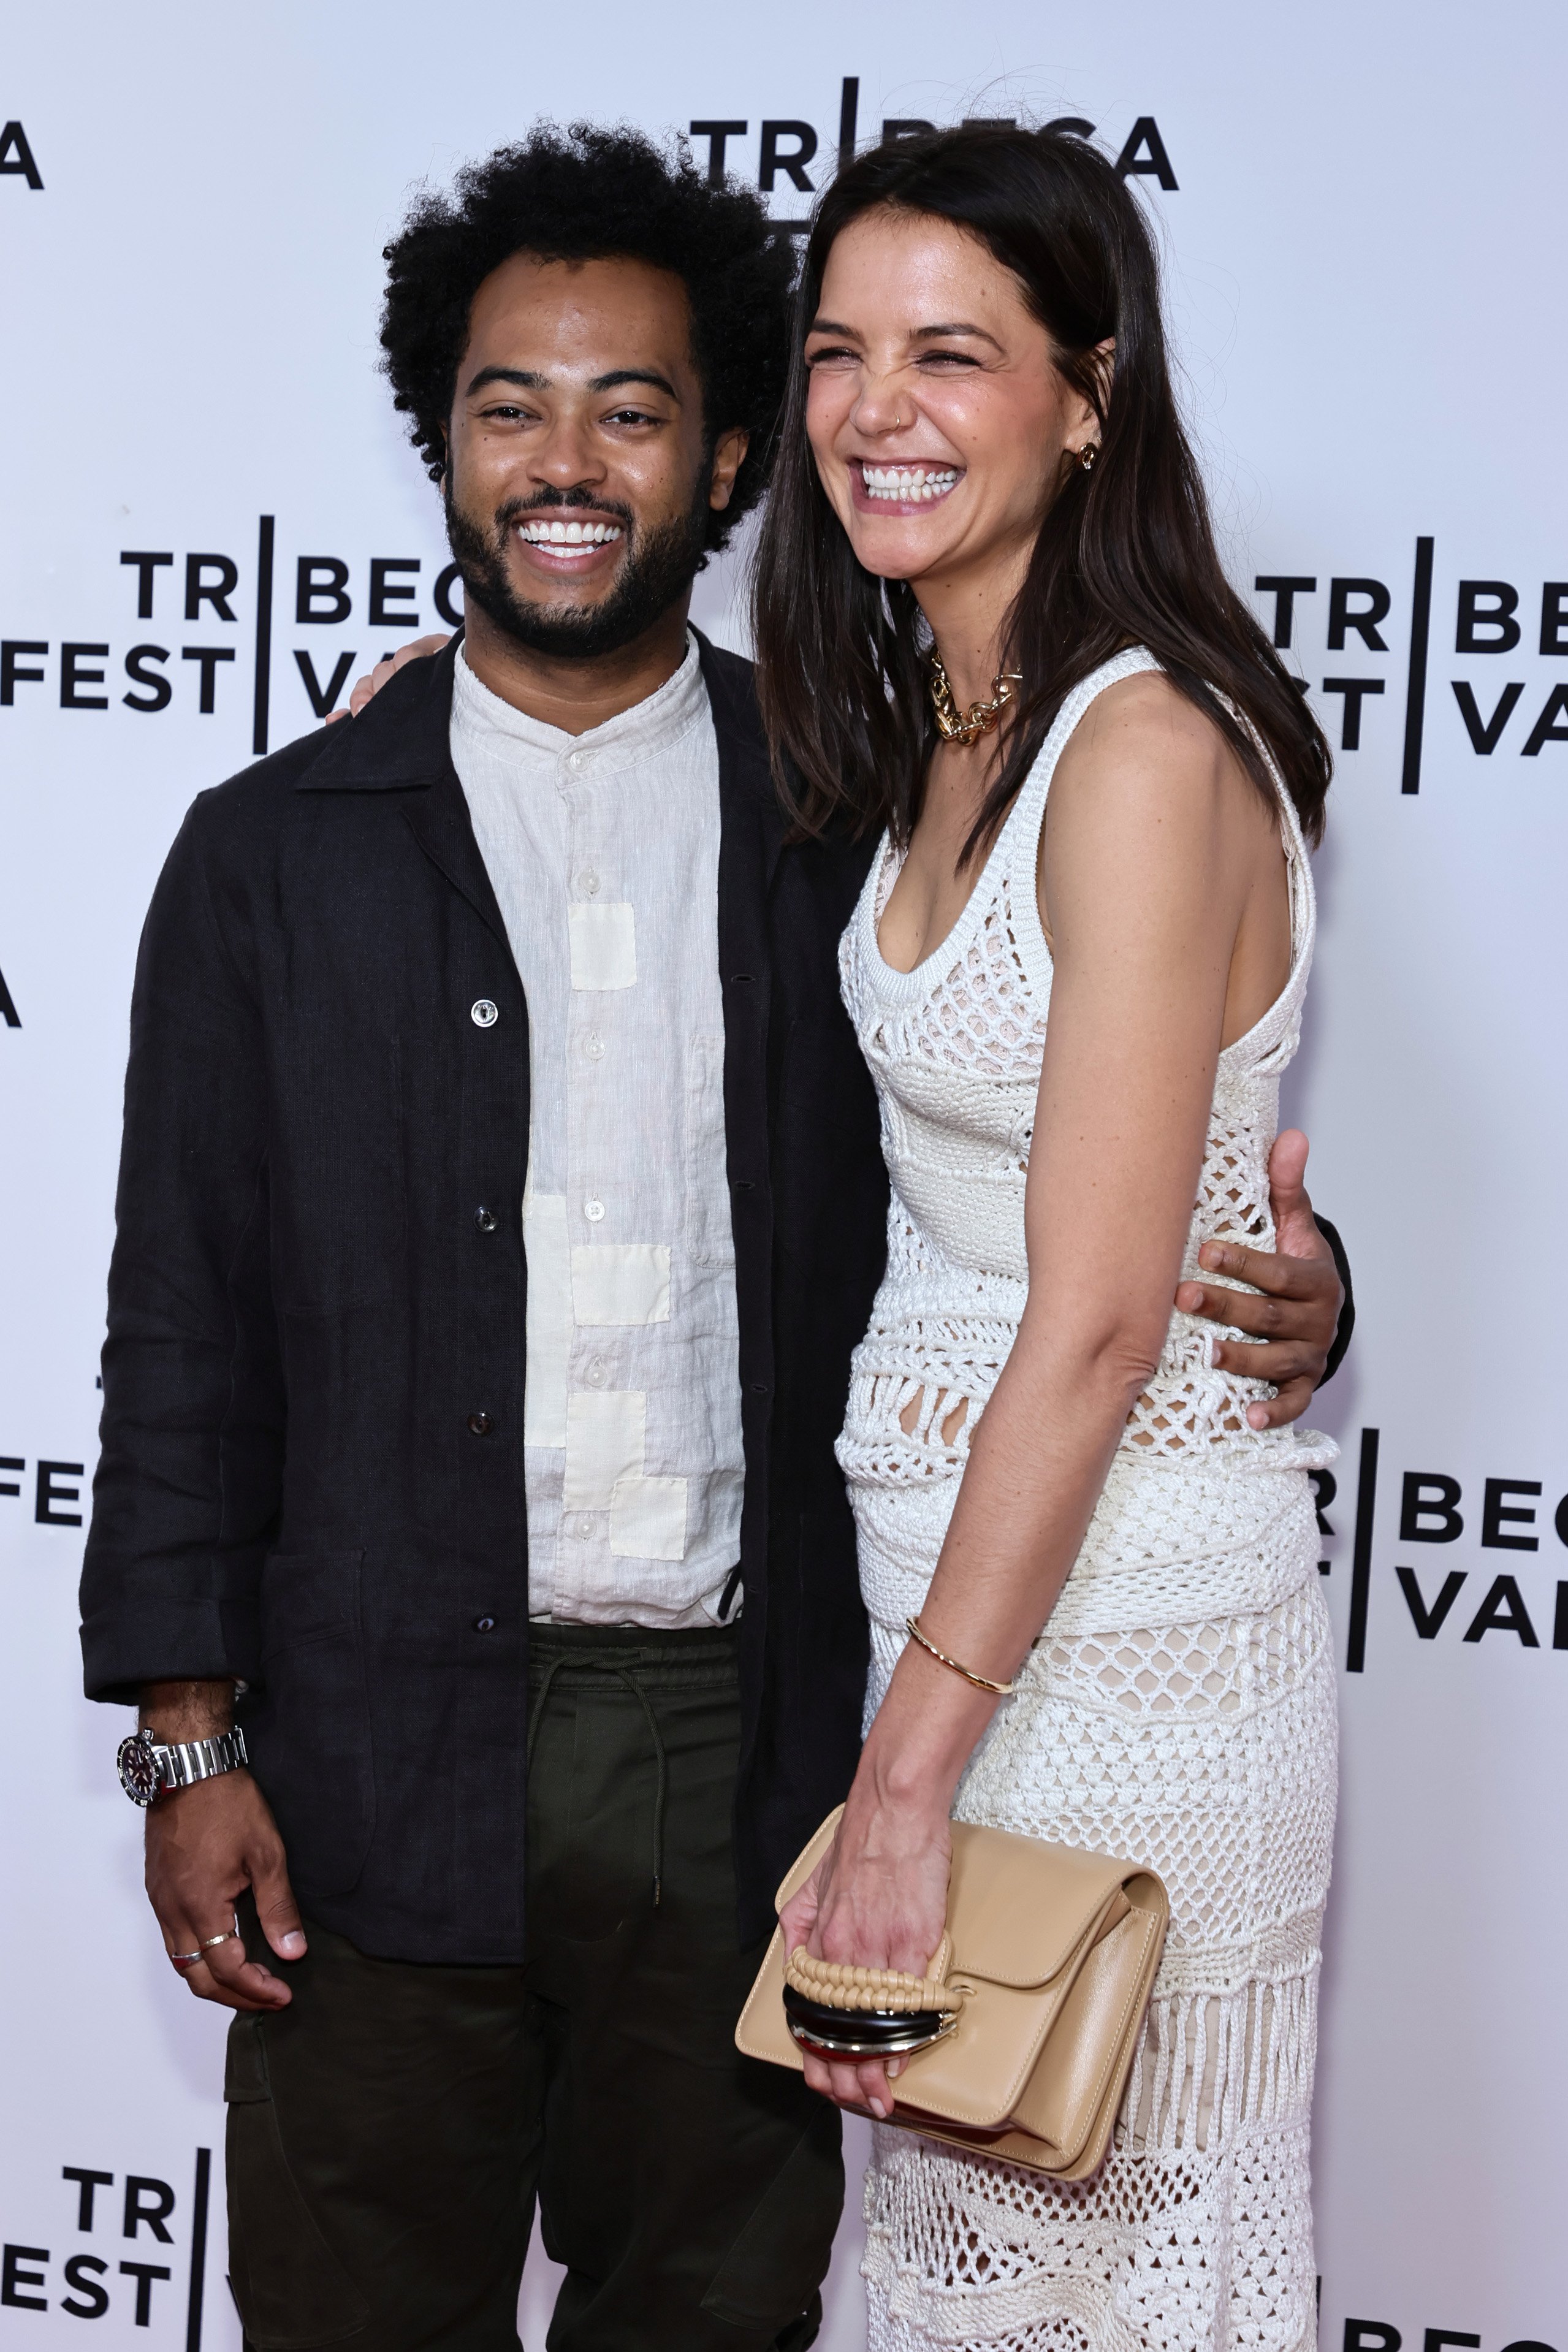 Katie Holmes and Bobby Wooten at the "Tribeca" premiere in New York in 2022. | Source: Getty Images